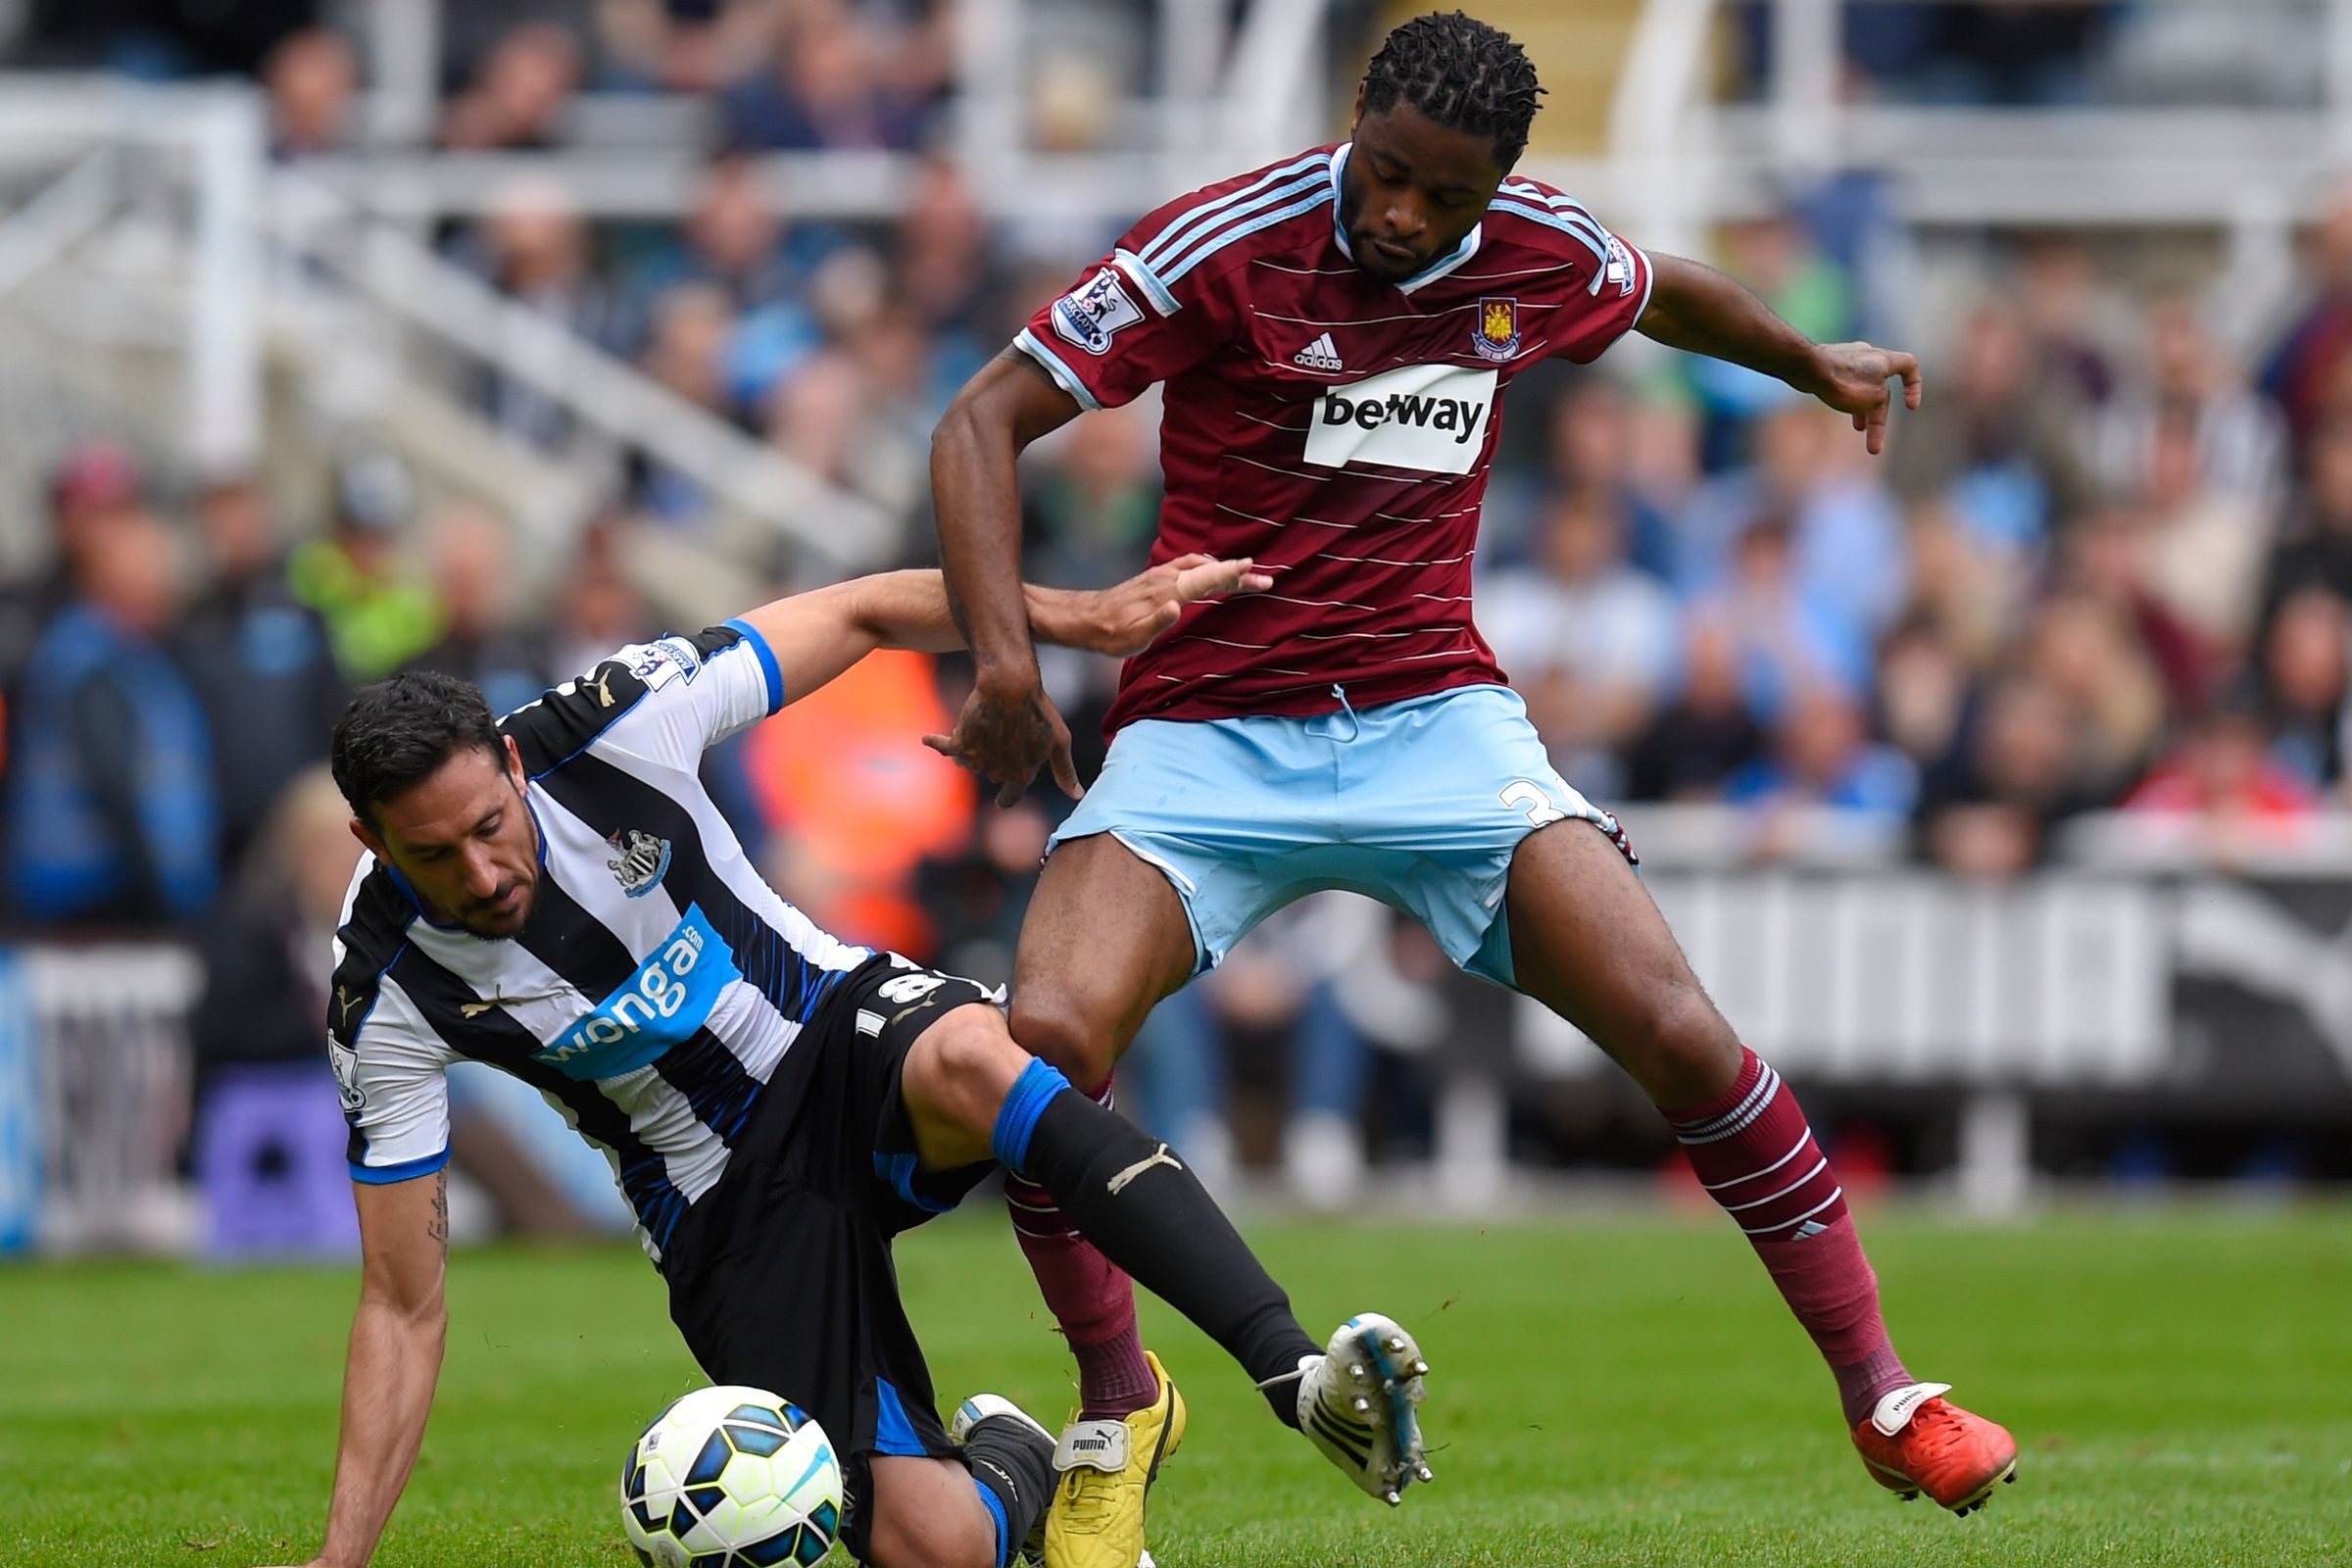 Chelsea move for Alex Song as rumours of Mikel's Chelsea exit persist